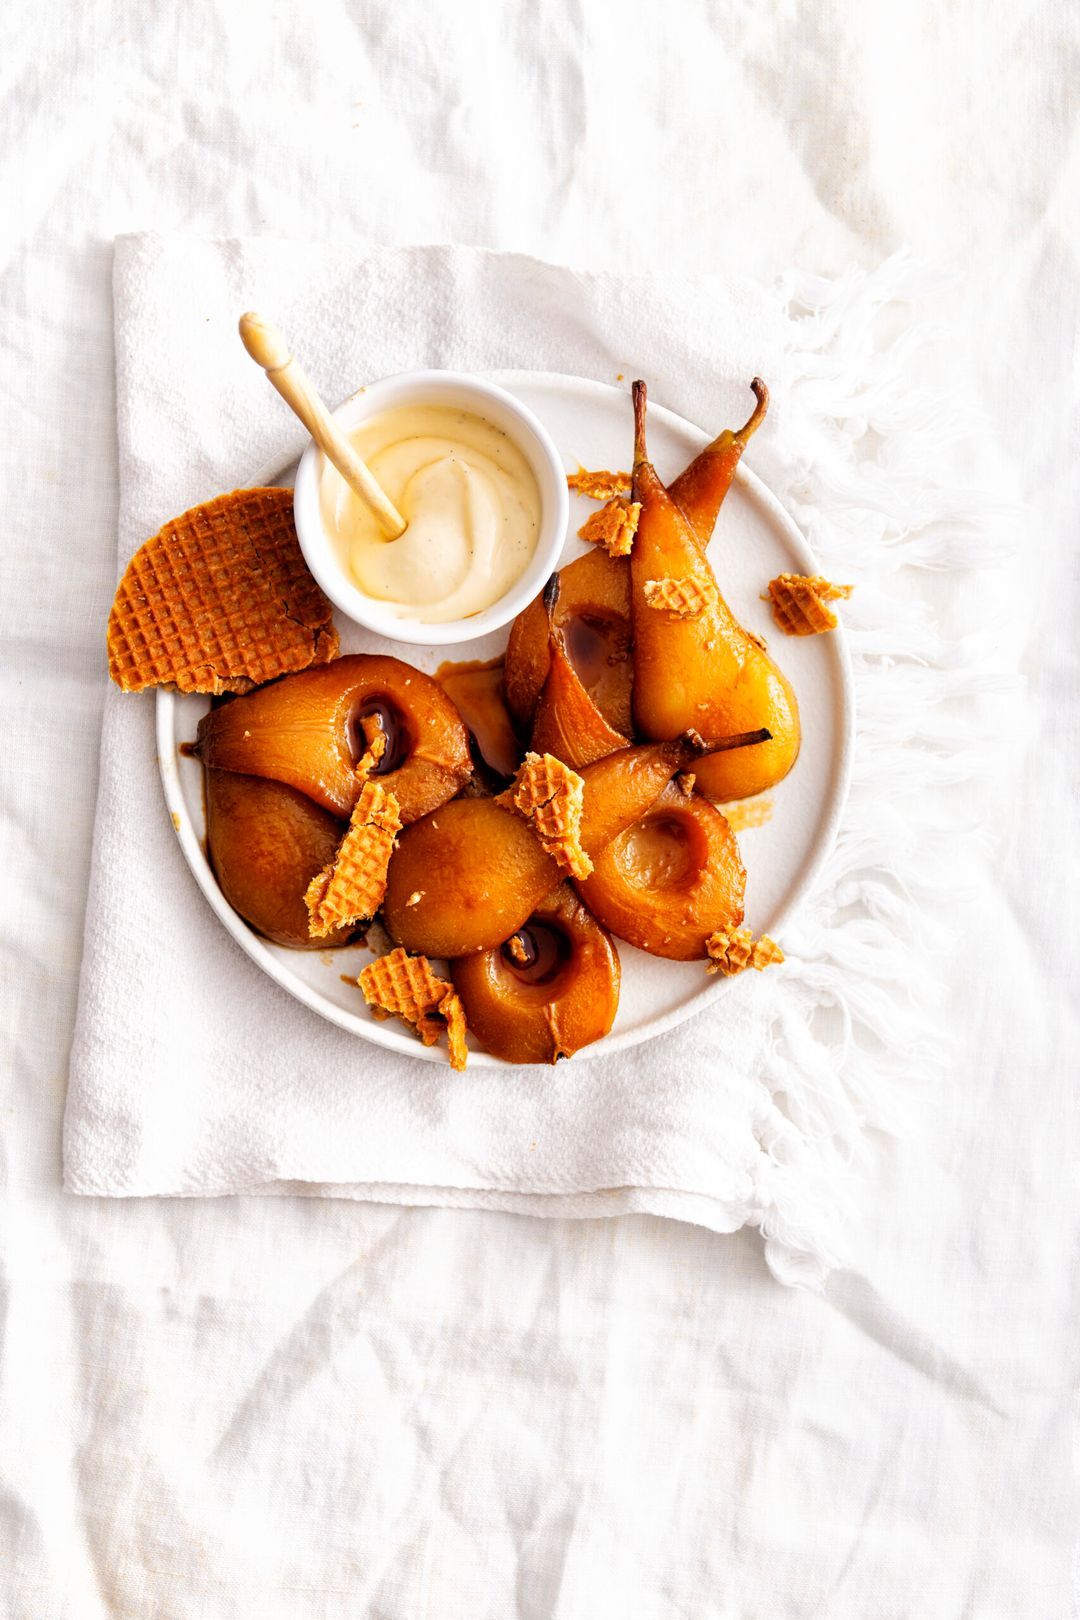 Roasted pears with apple syrup and vanilla cream